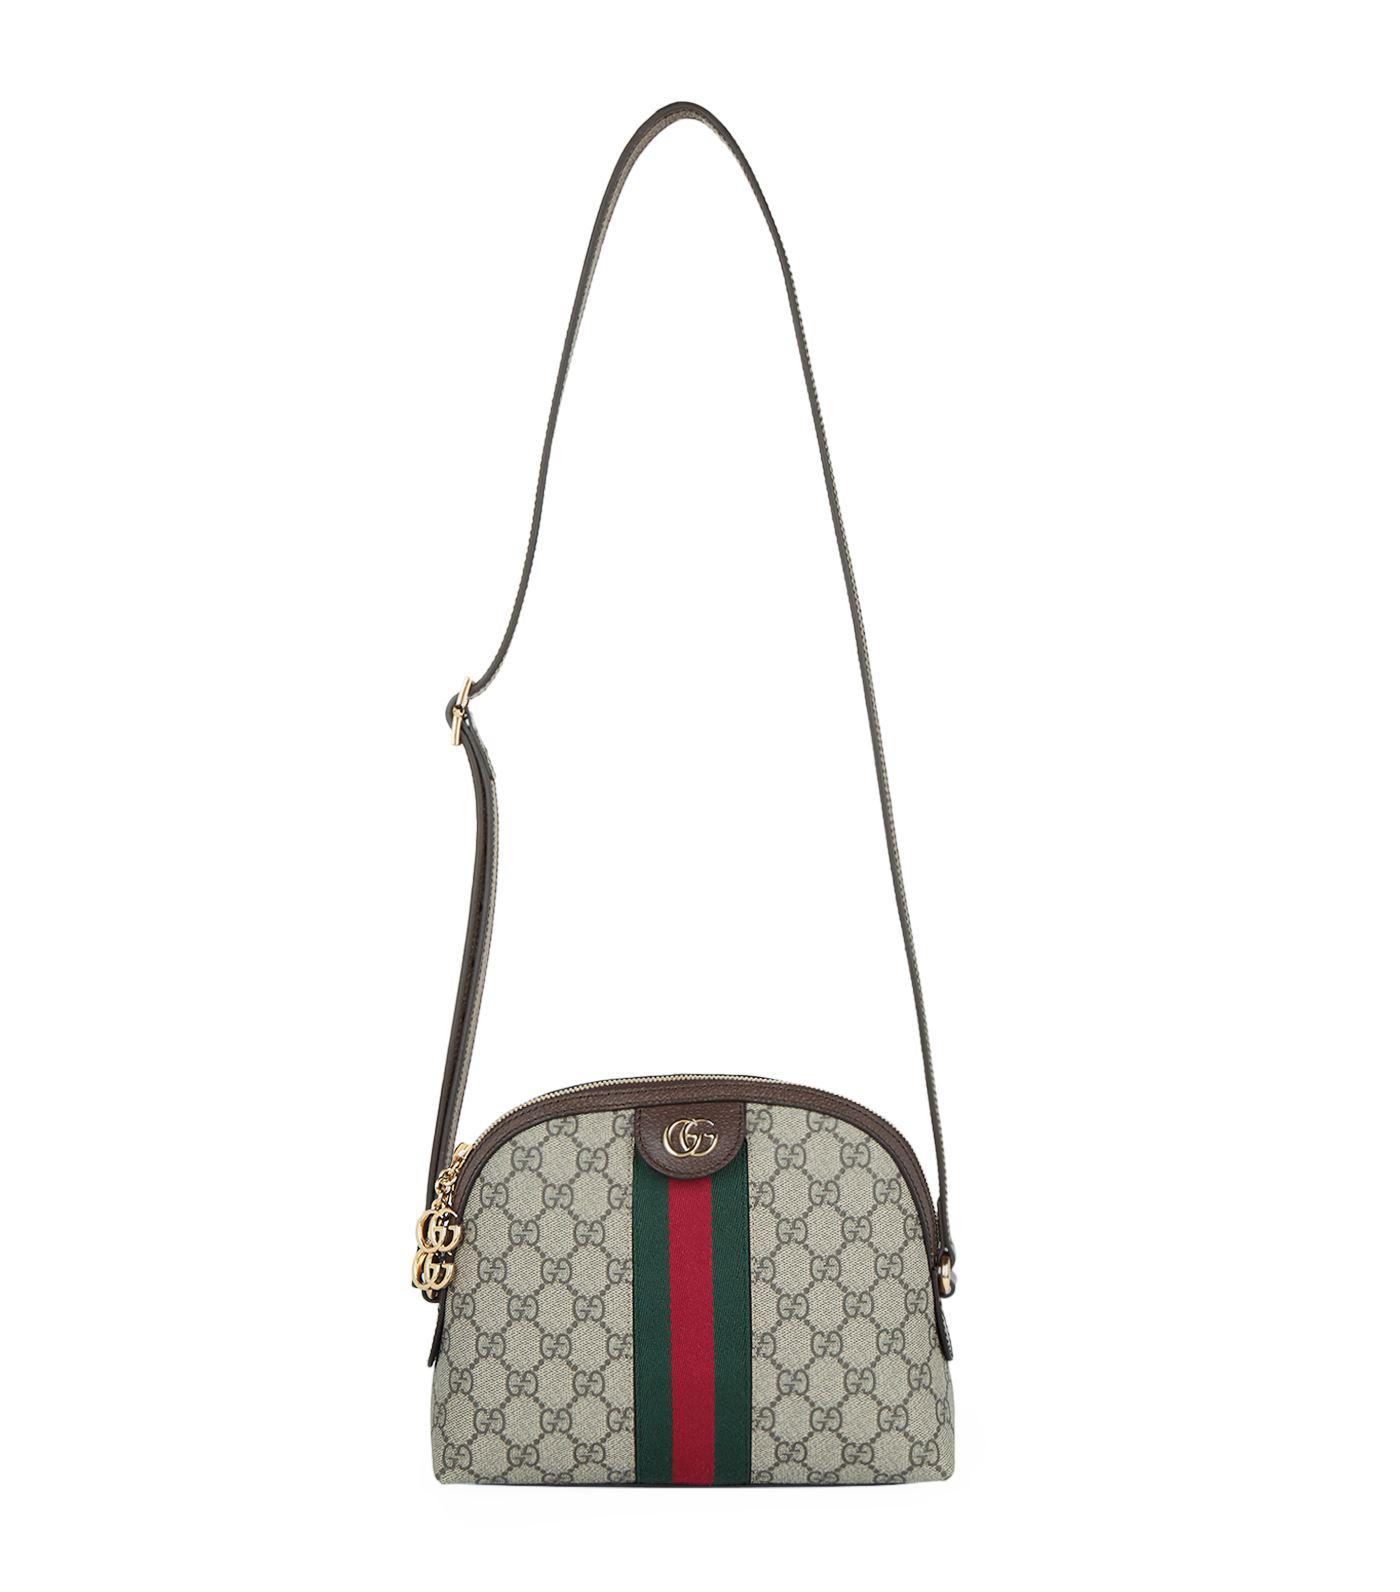 Gucci Canvas Small GG Supreme Ophidia Shoulder Bag in Green - Lyst